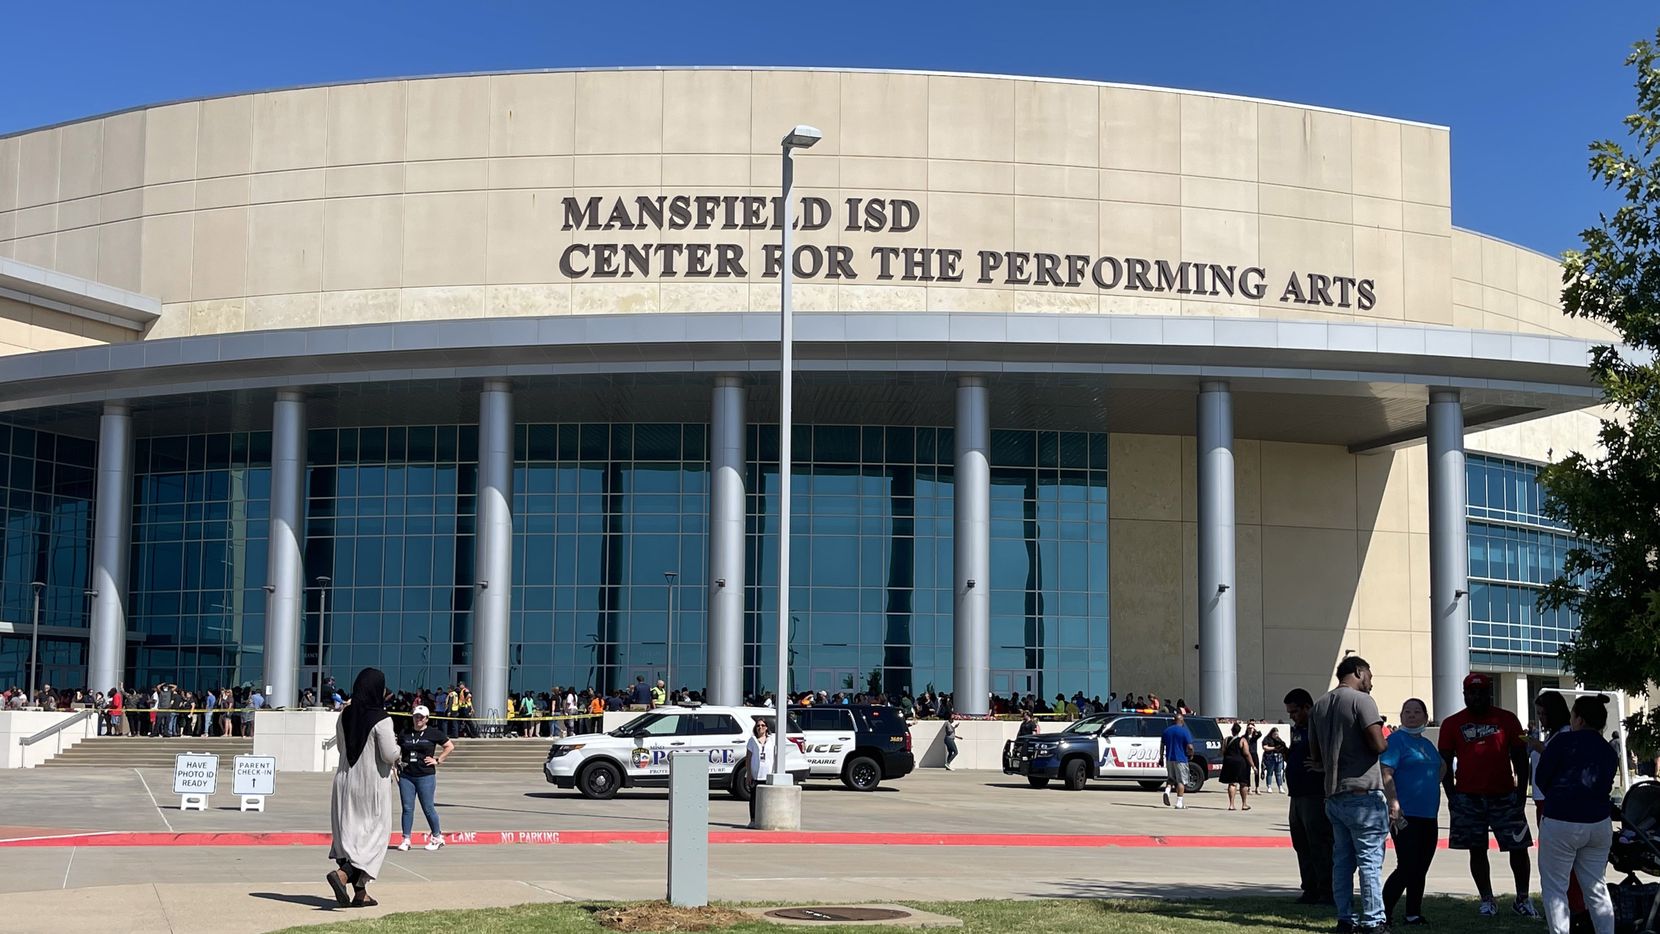 Mansfield ISD_Center for the Performing Arts